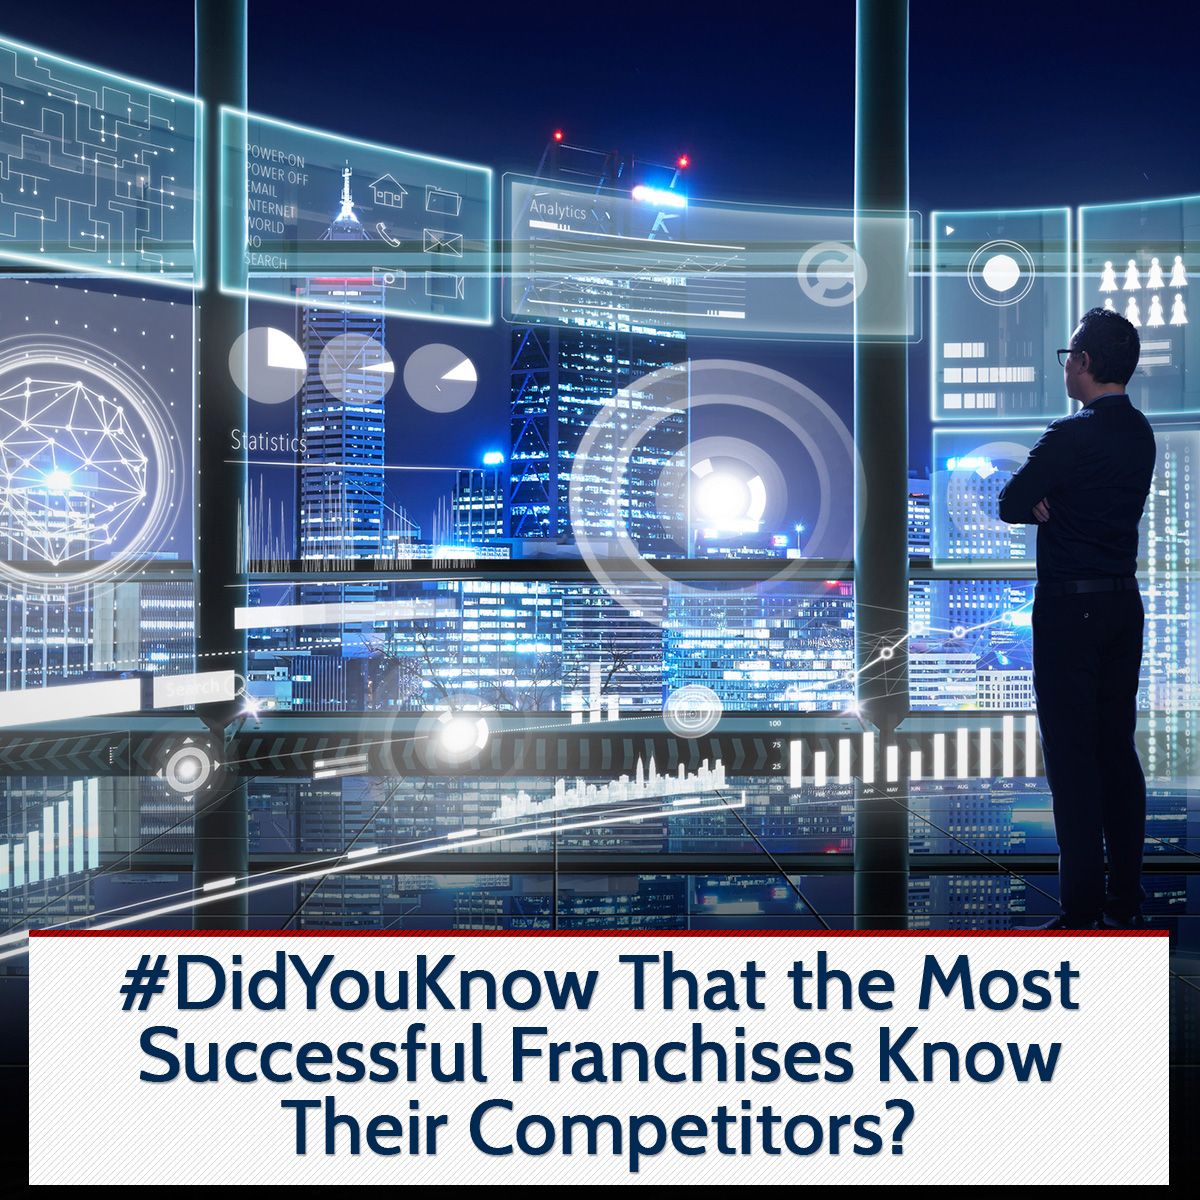 #DidYouKnow That the Most Successful Franchises Know Their Competitors?